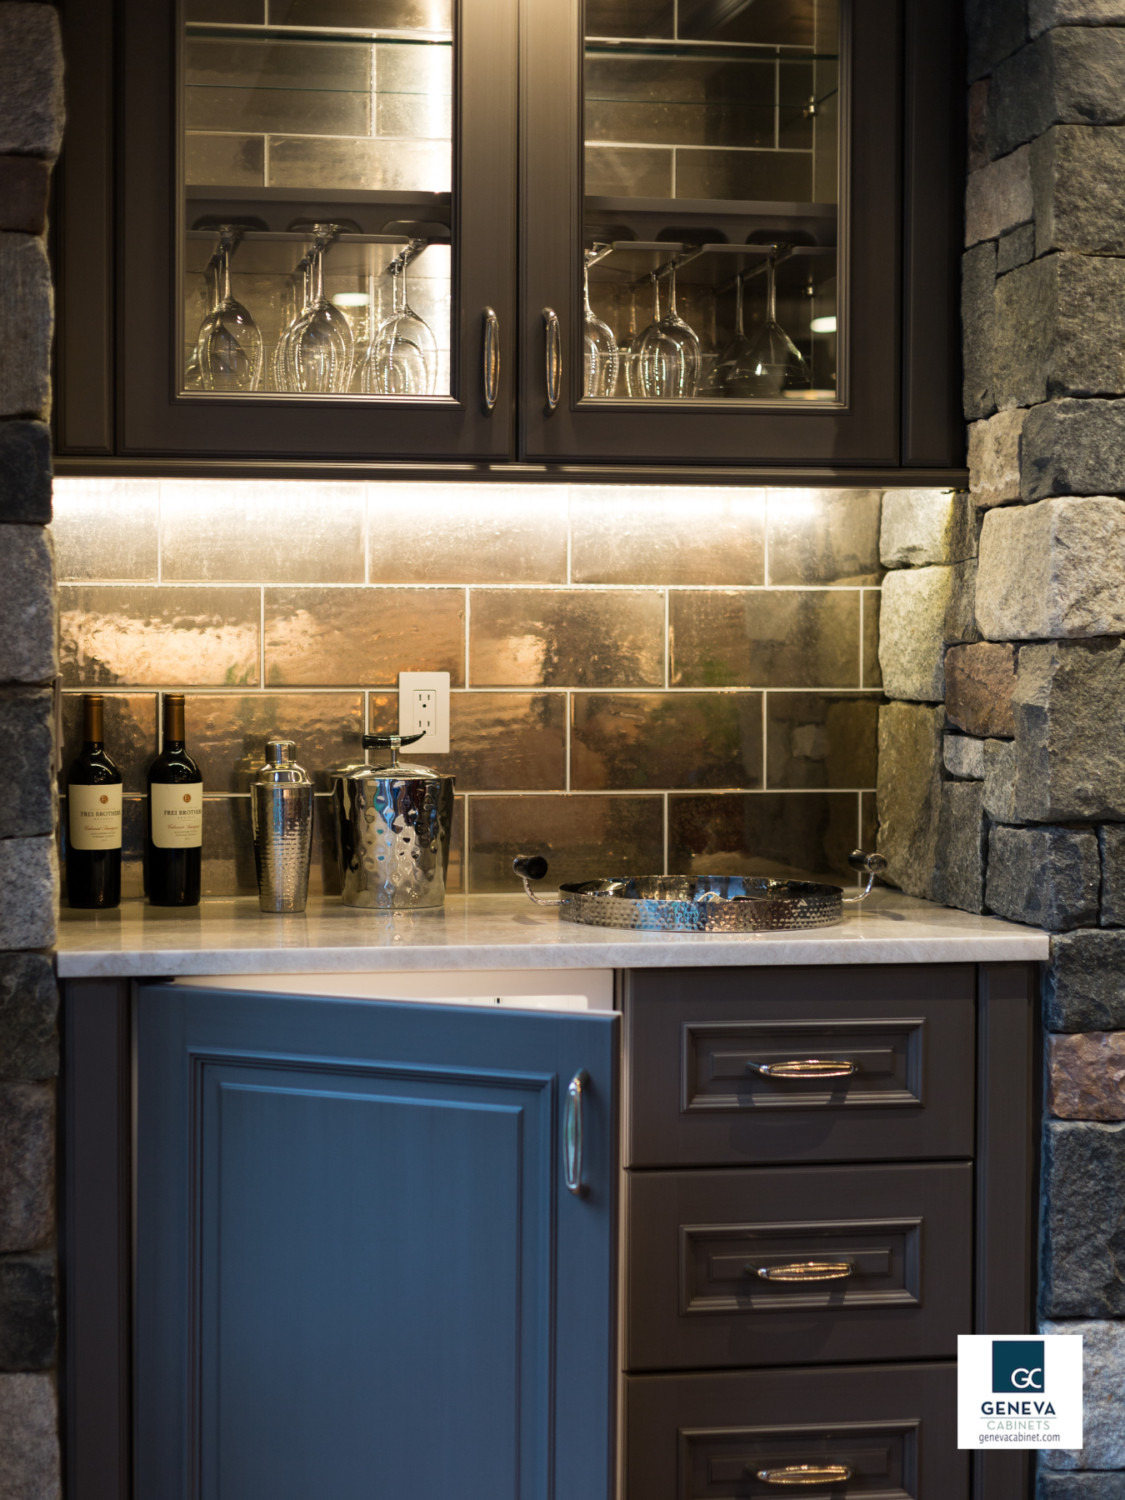 Kitchen Cabinet With Bar Counter
 Top 10 Tips Prepare Your Kitchen for Holiday